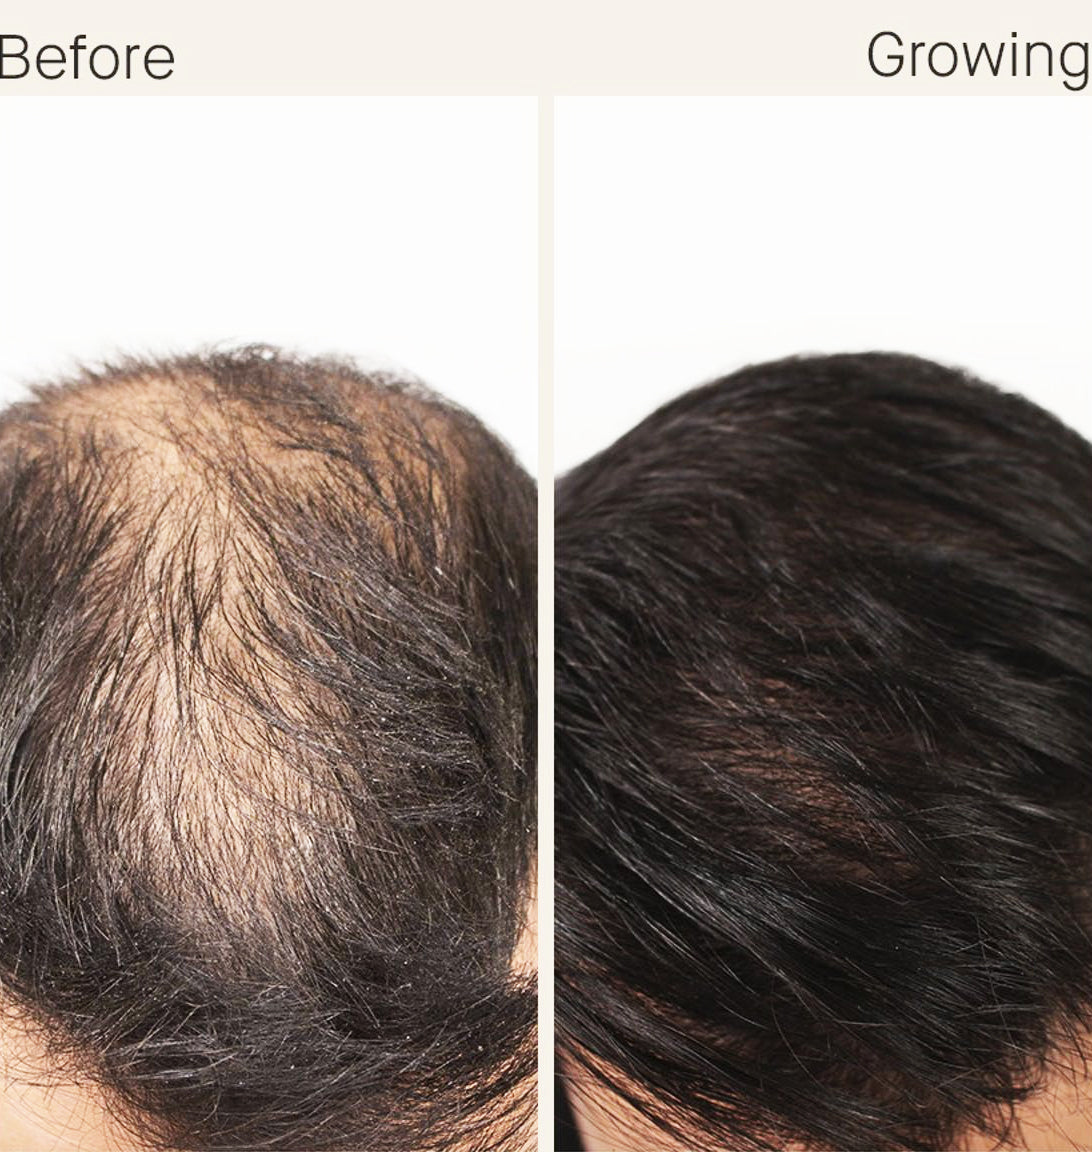 Nutrafol- Hair Growth Activator before and after